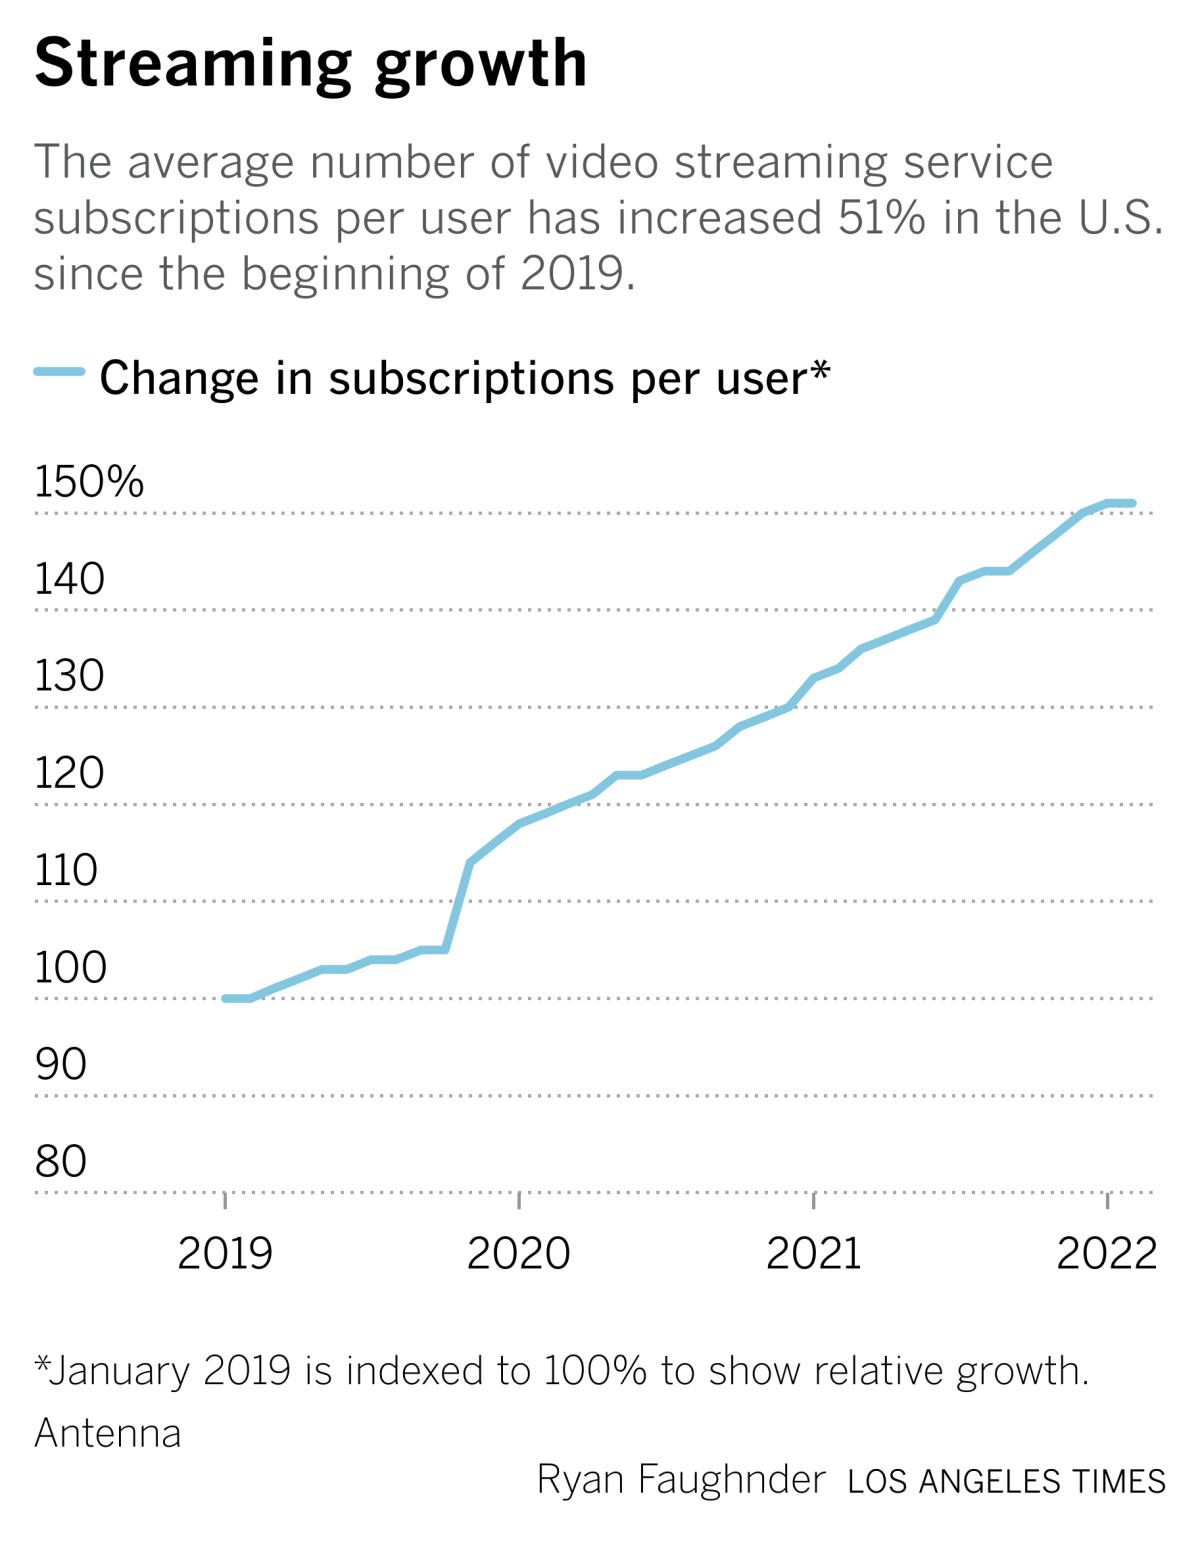 Streaming video subscriptions per user have grown 51% since January 2019.